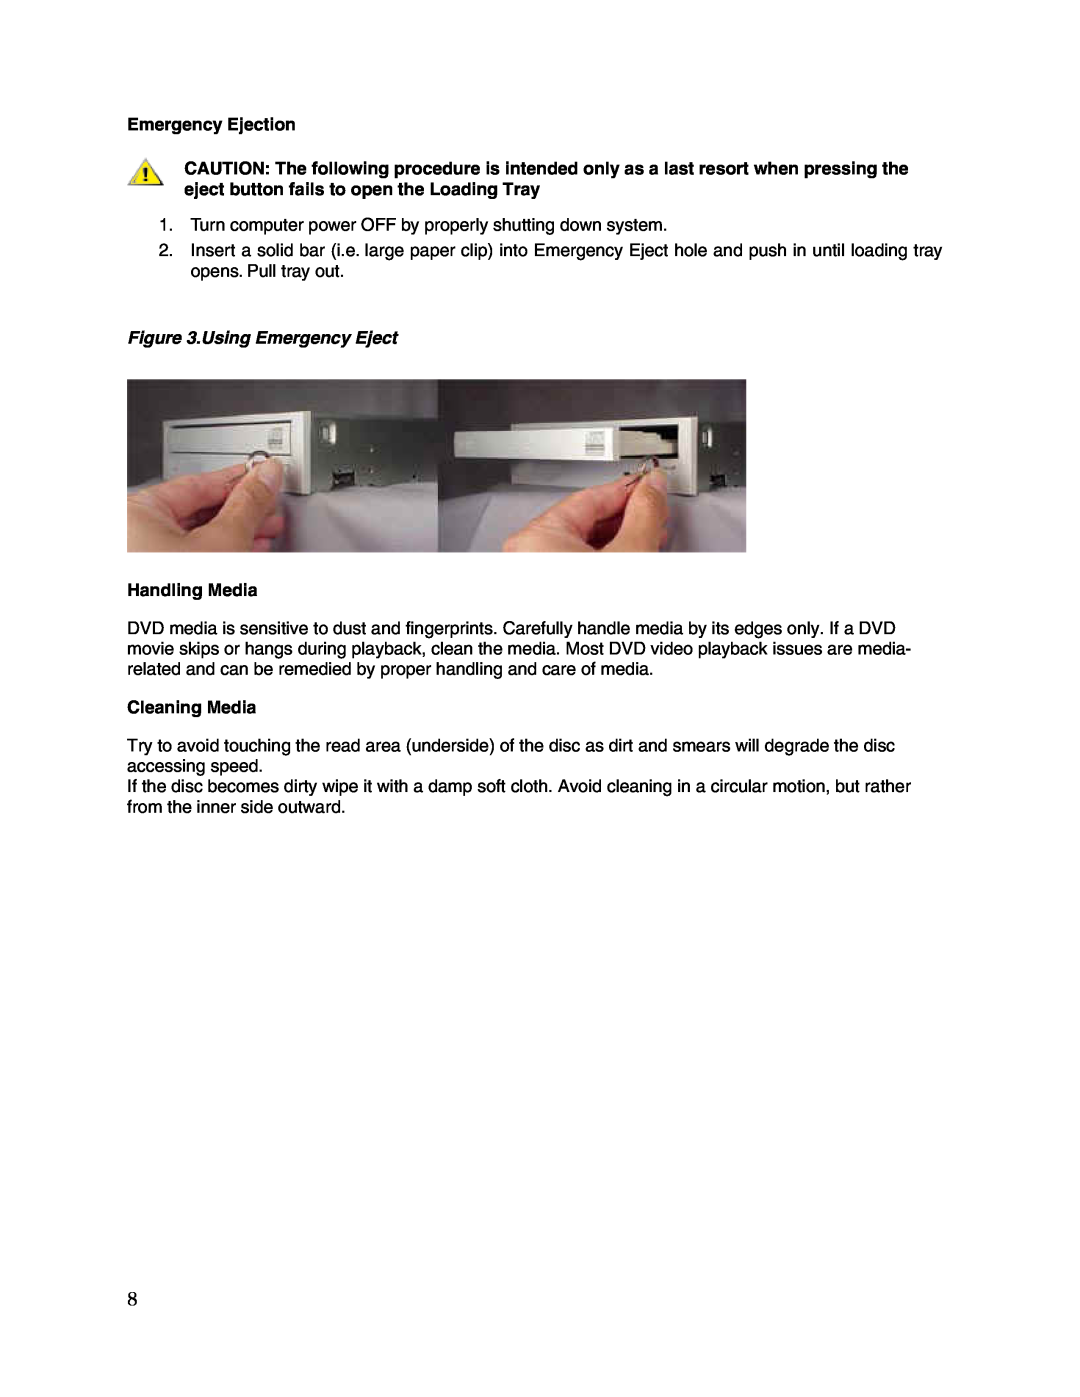 Toshiba SD-R1002 user manual Using Emergency Eject, Emergency Ejection, Handling Media, Cleaning Media 